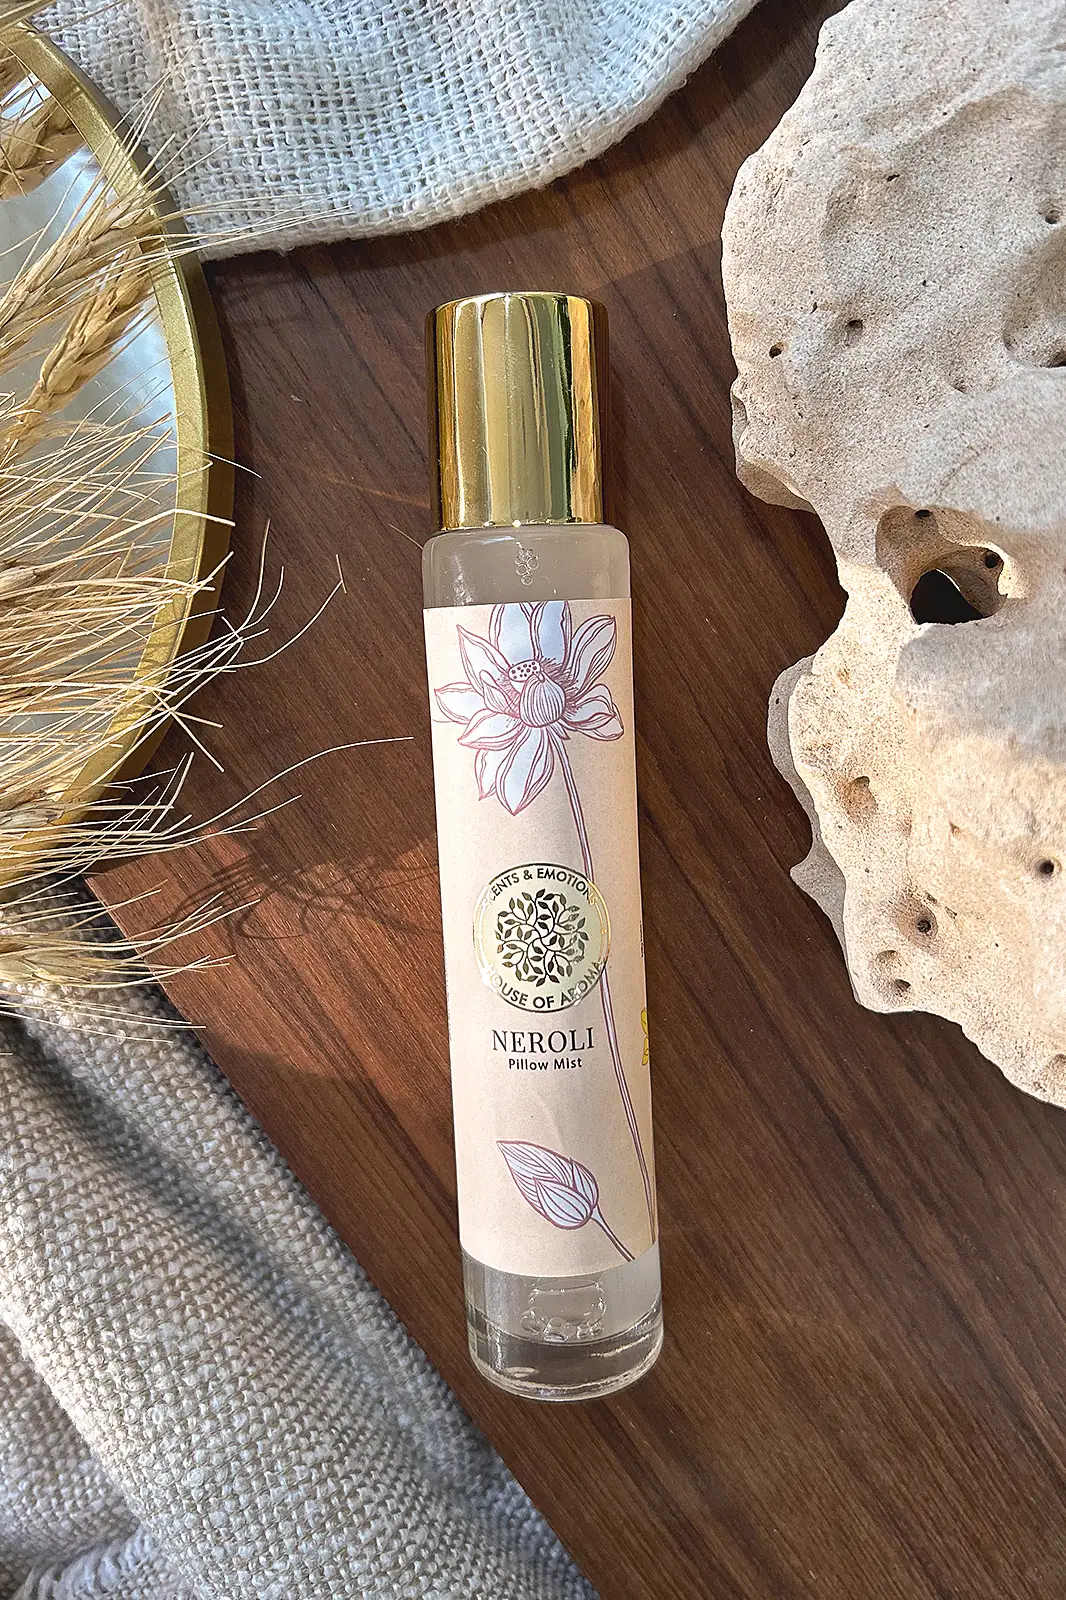 Natural Neroli Pillow Mist Sleep spray, fast sleeping spray, fast sleep spray, sleep spray for adults, instant sleep spray, deep sleep spray buy online, aromatic products, fragrance, pillow mist spray online, fragrance for home